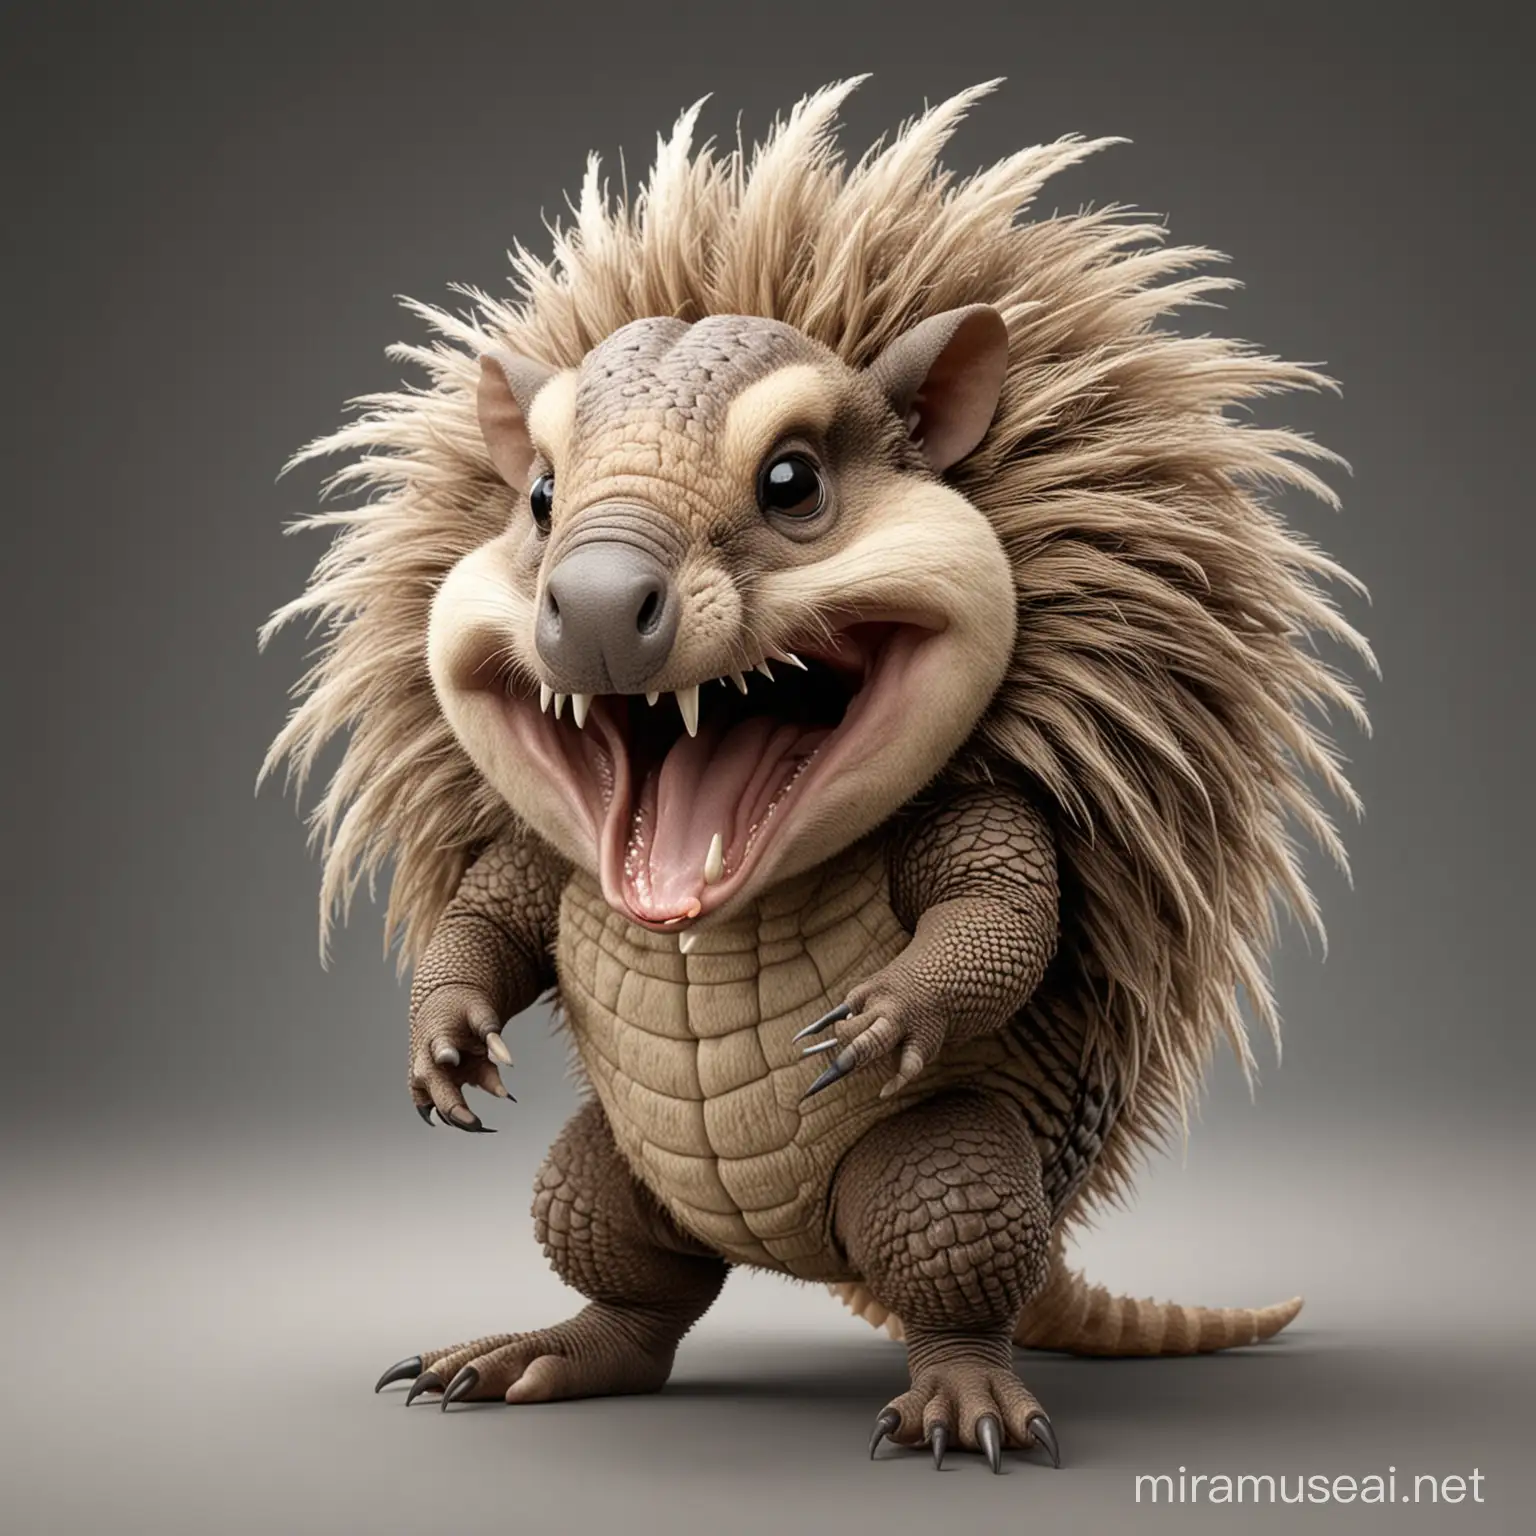 A Screaming Hairy Armadillo mascot without spikes but thick sporadic long hairs